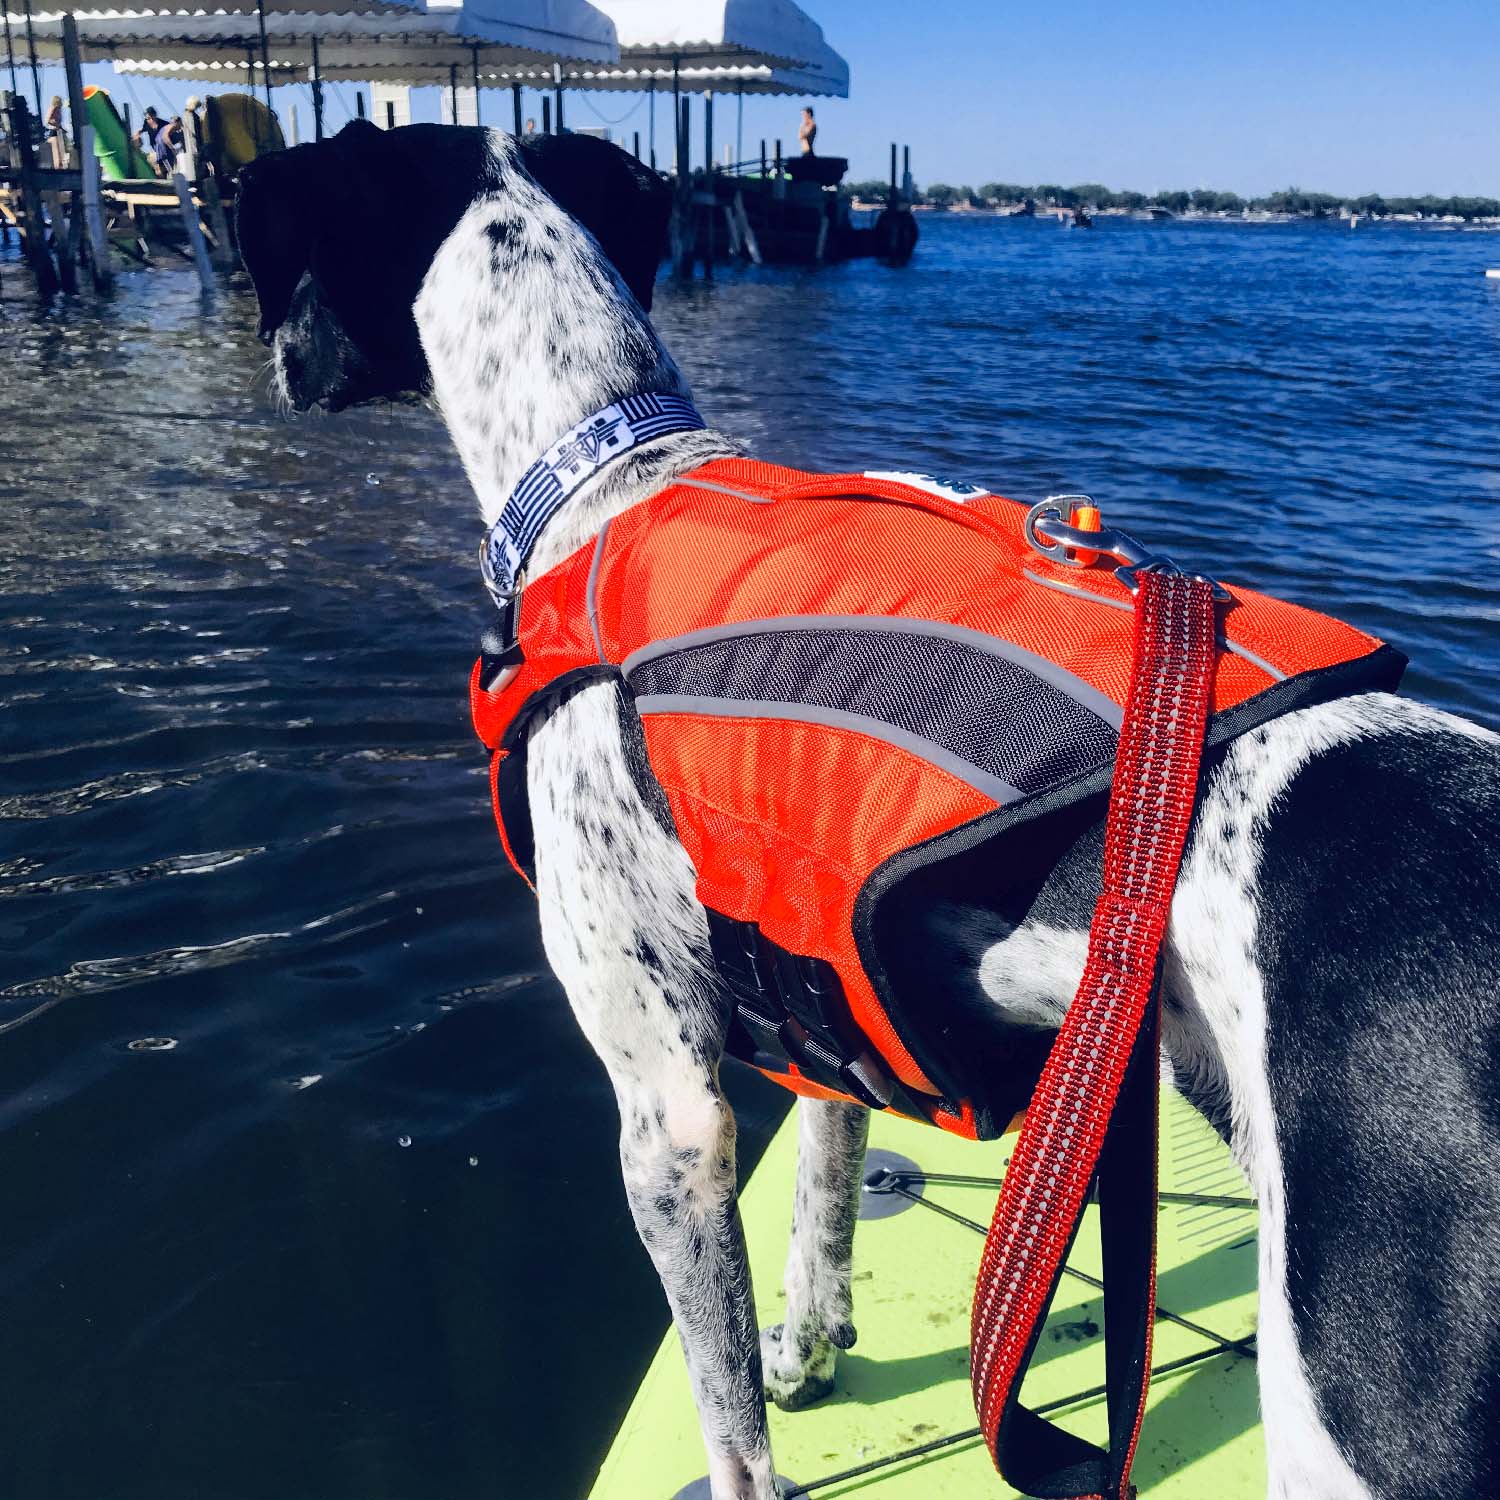 Black and white dog wearing an orange monterey bay dog lifejacket. Dog is standing on a stand up paddleboard on a lake. 